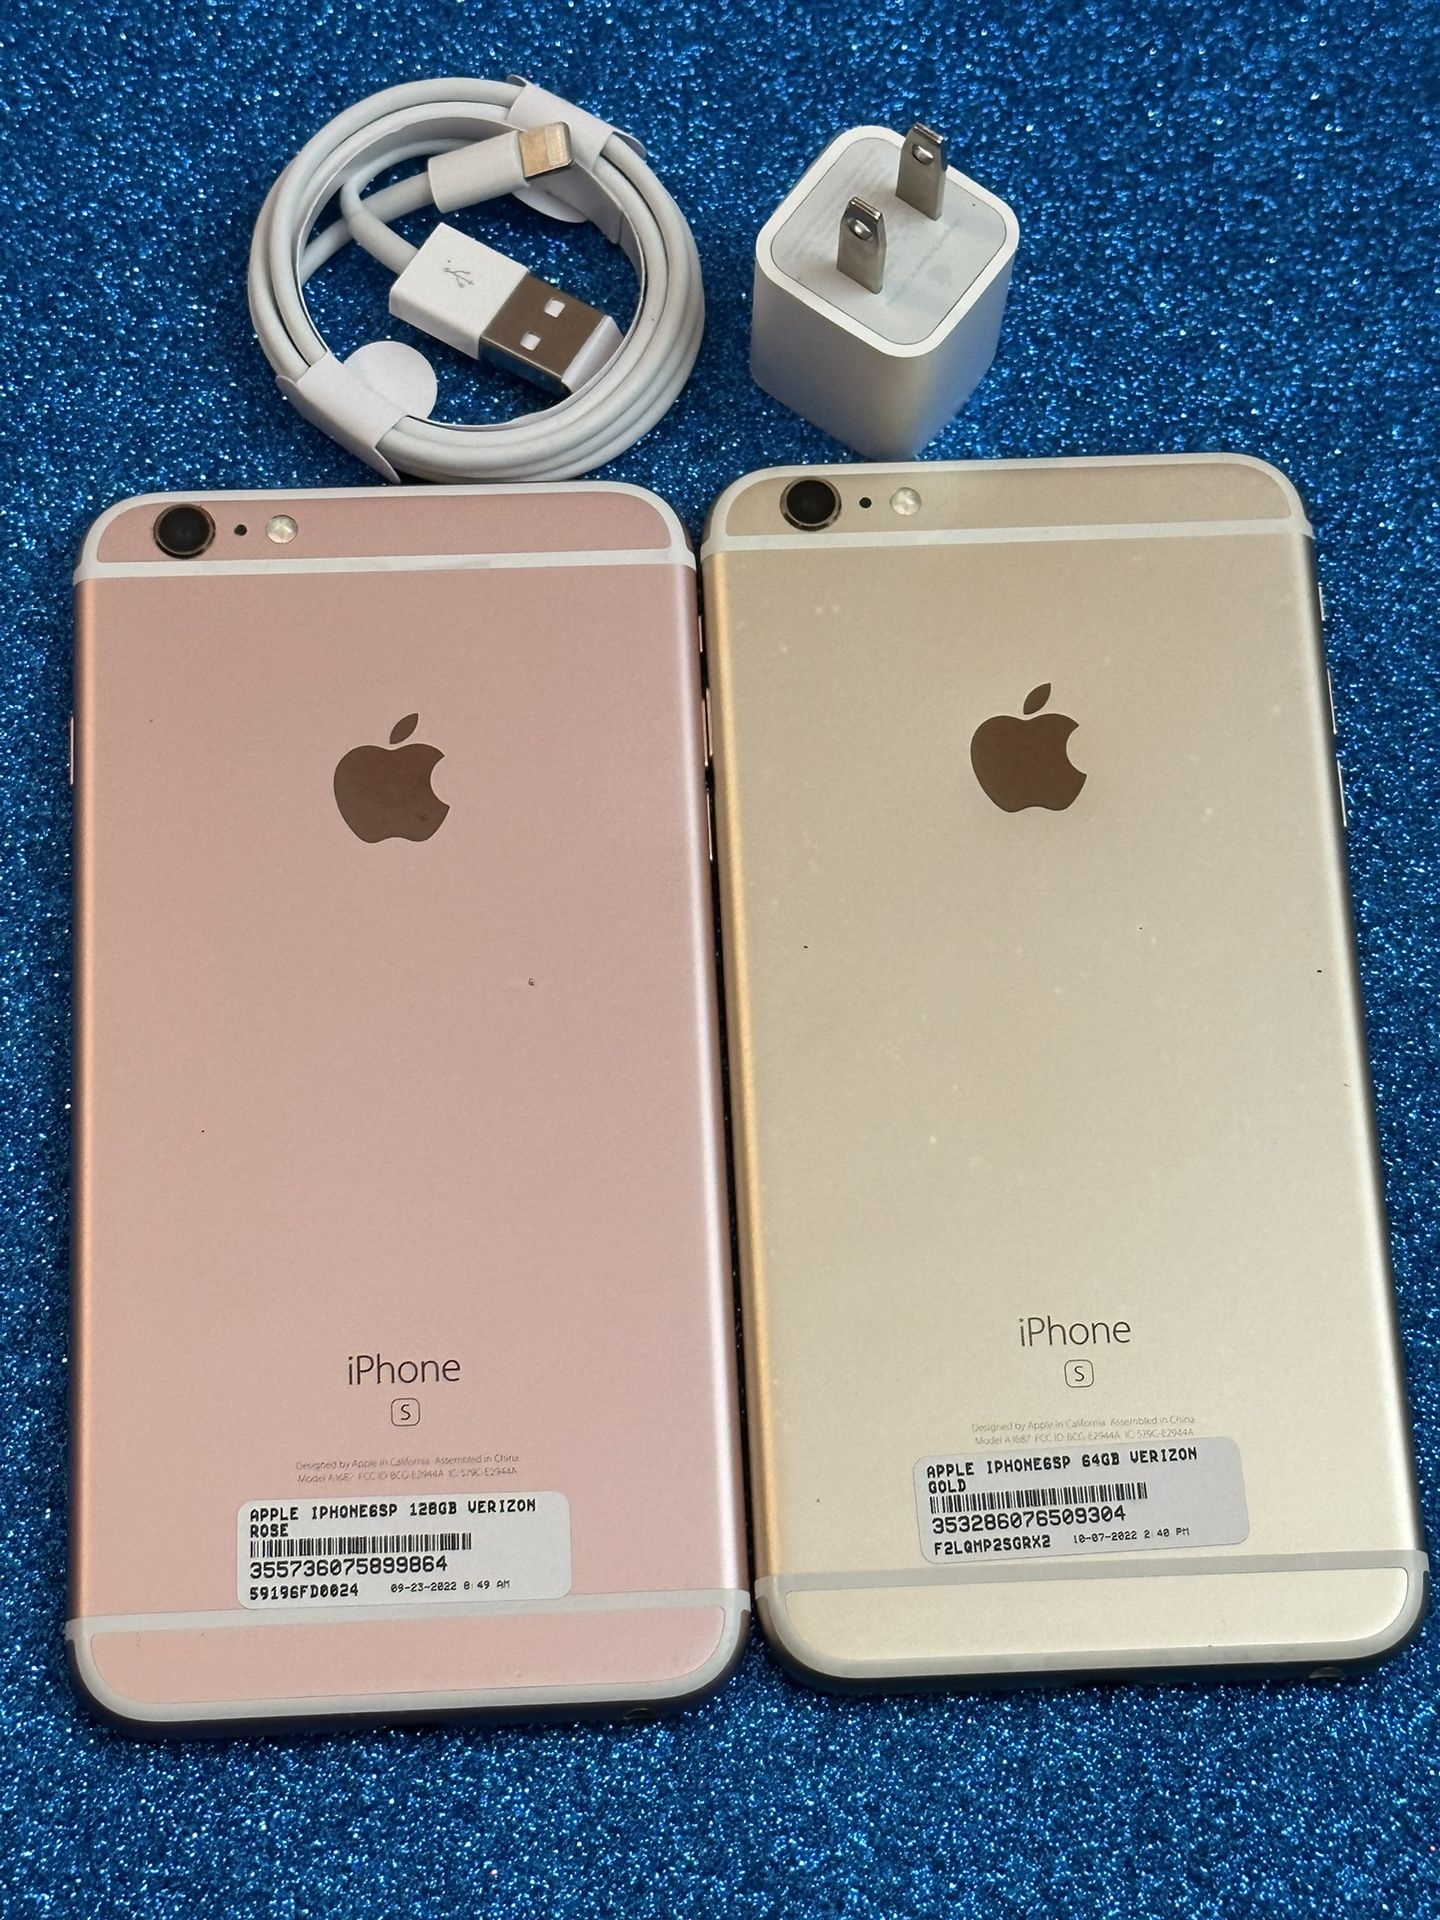 IPhone 6s Plus (64gb) Gold And Rosegold, Excellent Condition 